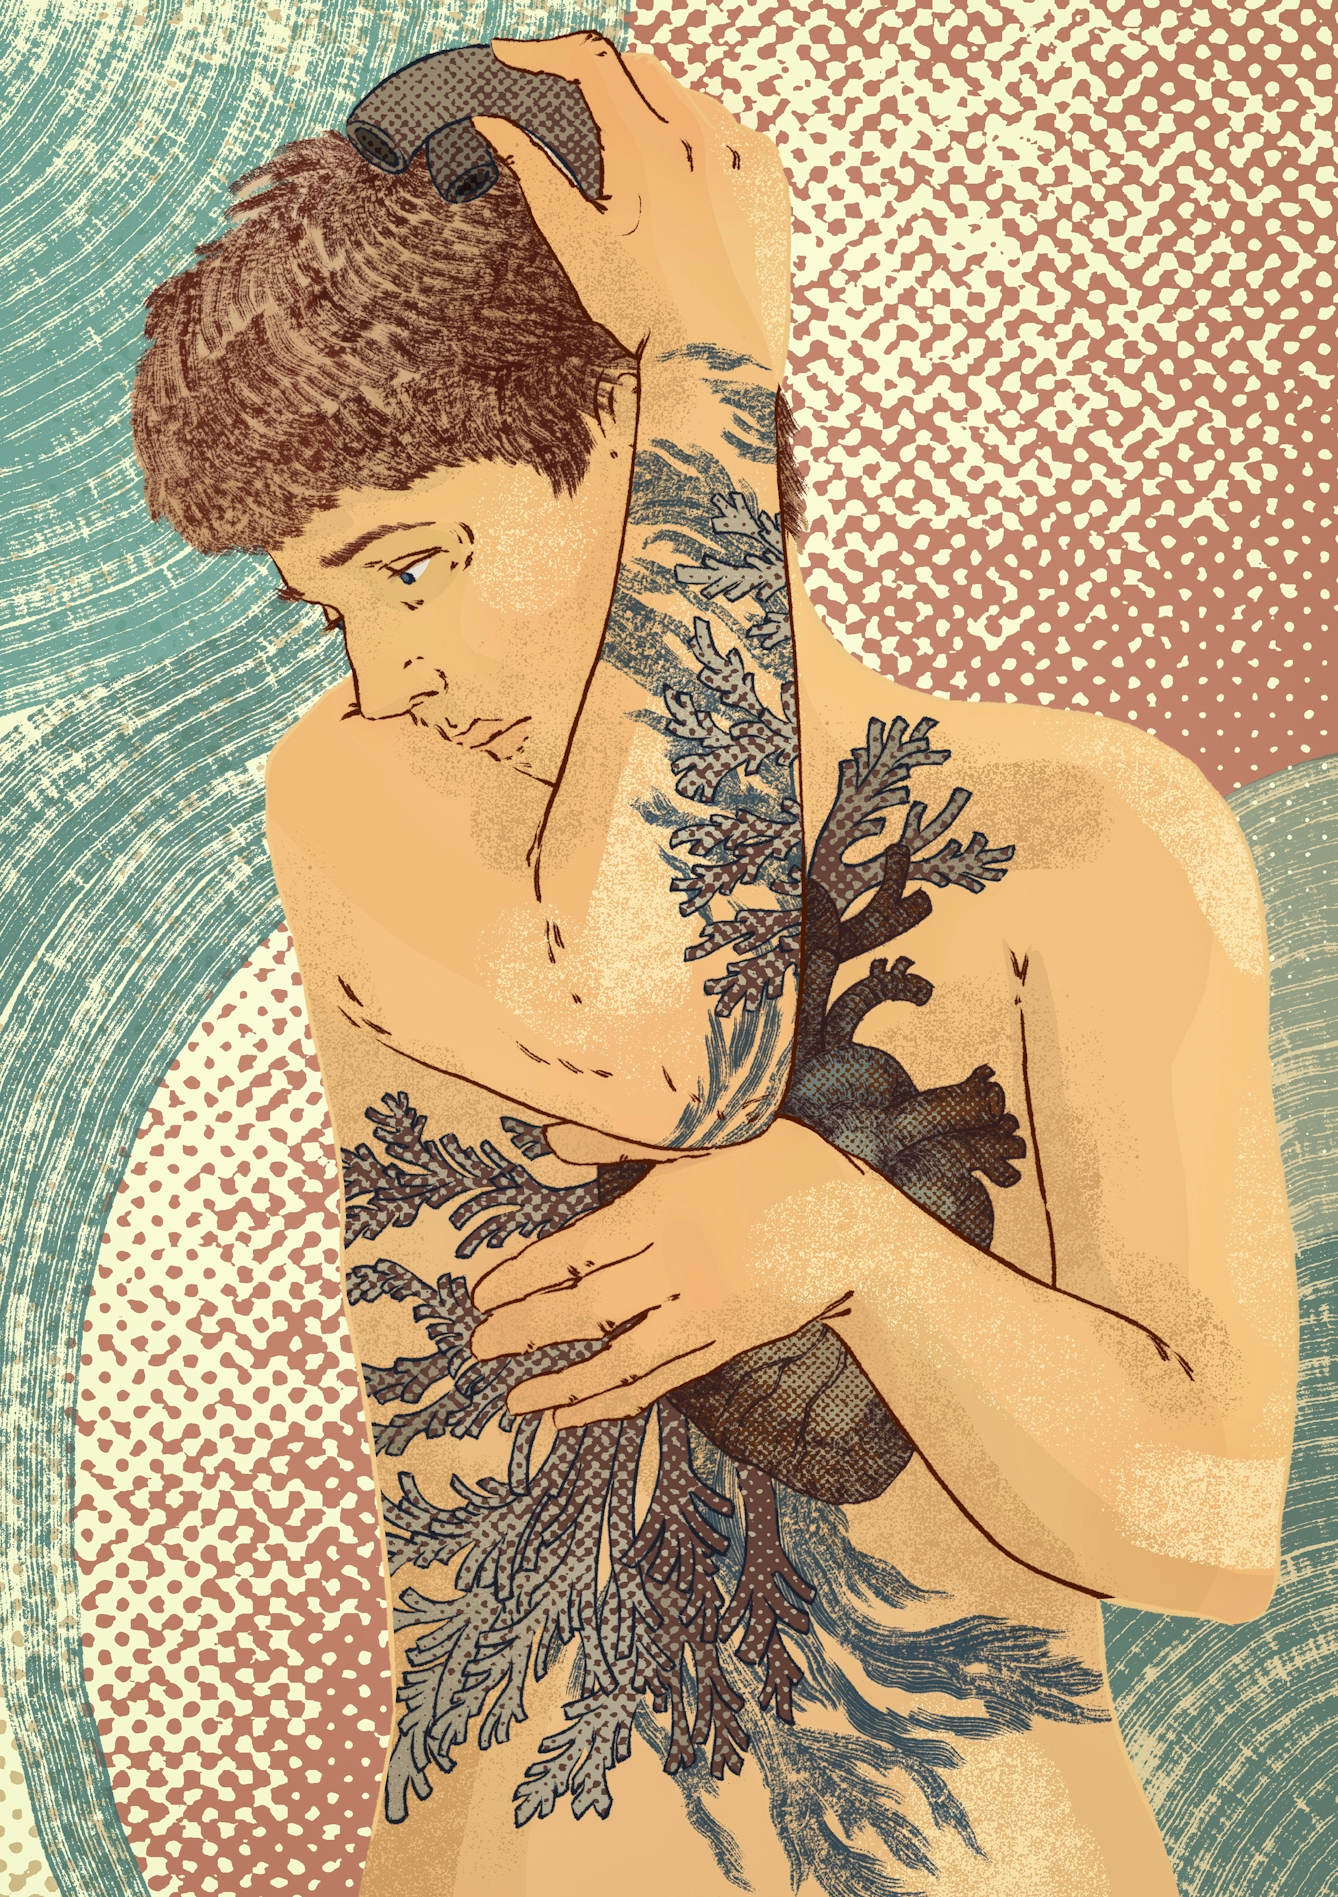 Digital colour artwork showing the bare torso of a woman. She is viewed from the front and is holding her right arm up over her head, cradling her face, and her left arm across her chest. On her side, chest and arm is a colourful tattoo-like illustration of an anatomical drawing of a human heart set with flame-like decorative motifs. The tattoo is made up of red and blue tones. Behind the figure are abstract circular and half-tone printed background patterns in reds and greens.